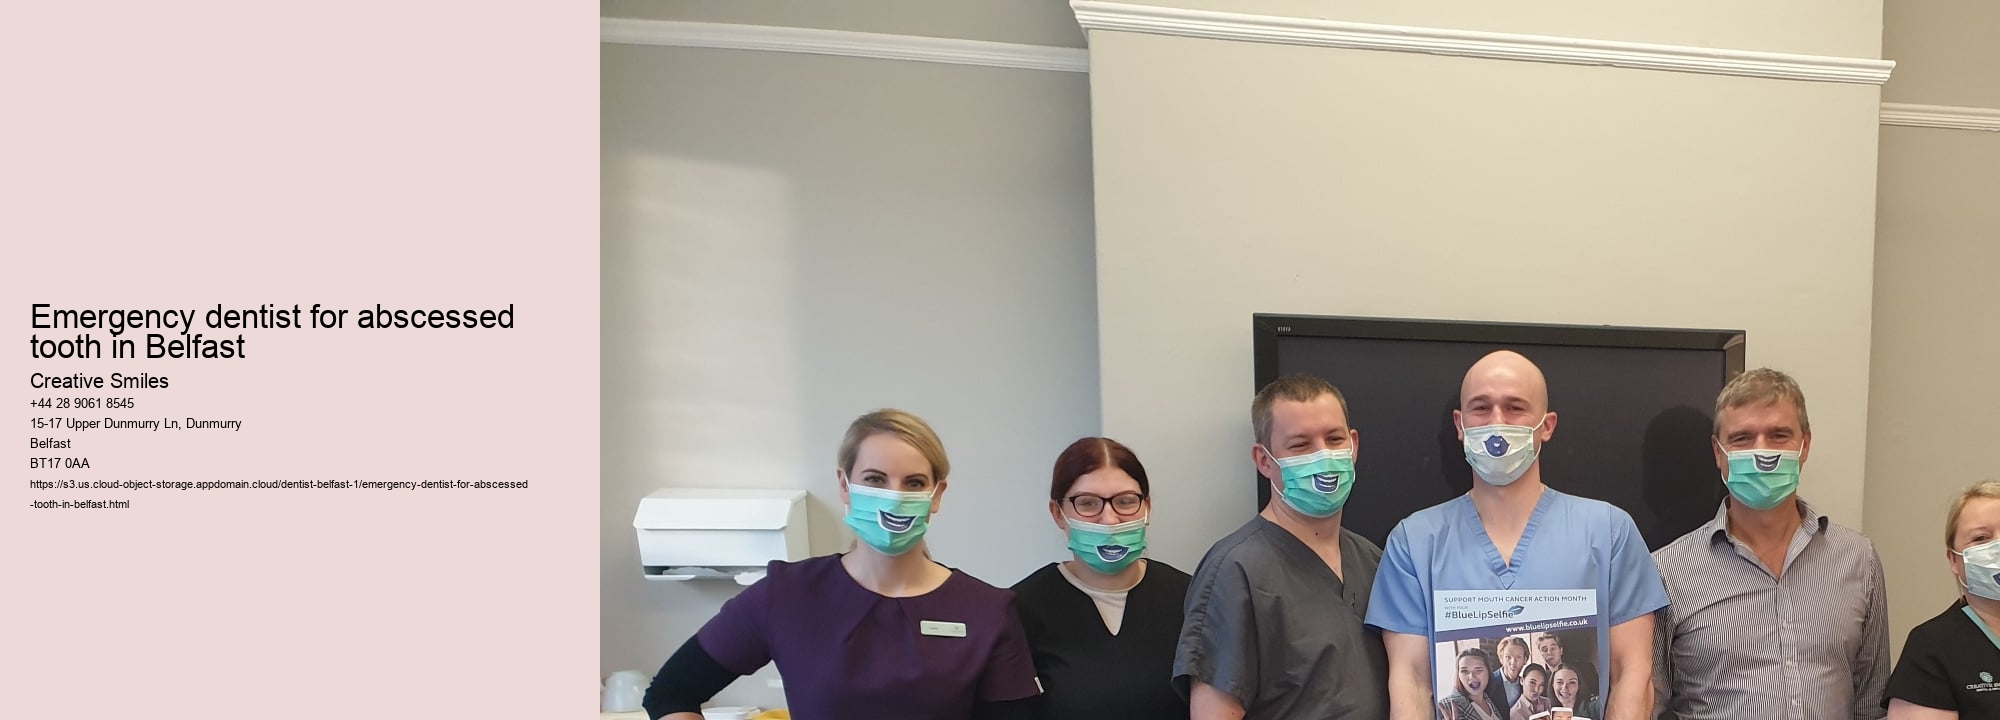 Emergency dentist for abscessed tooth in Belfast